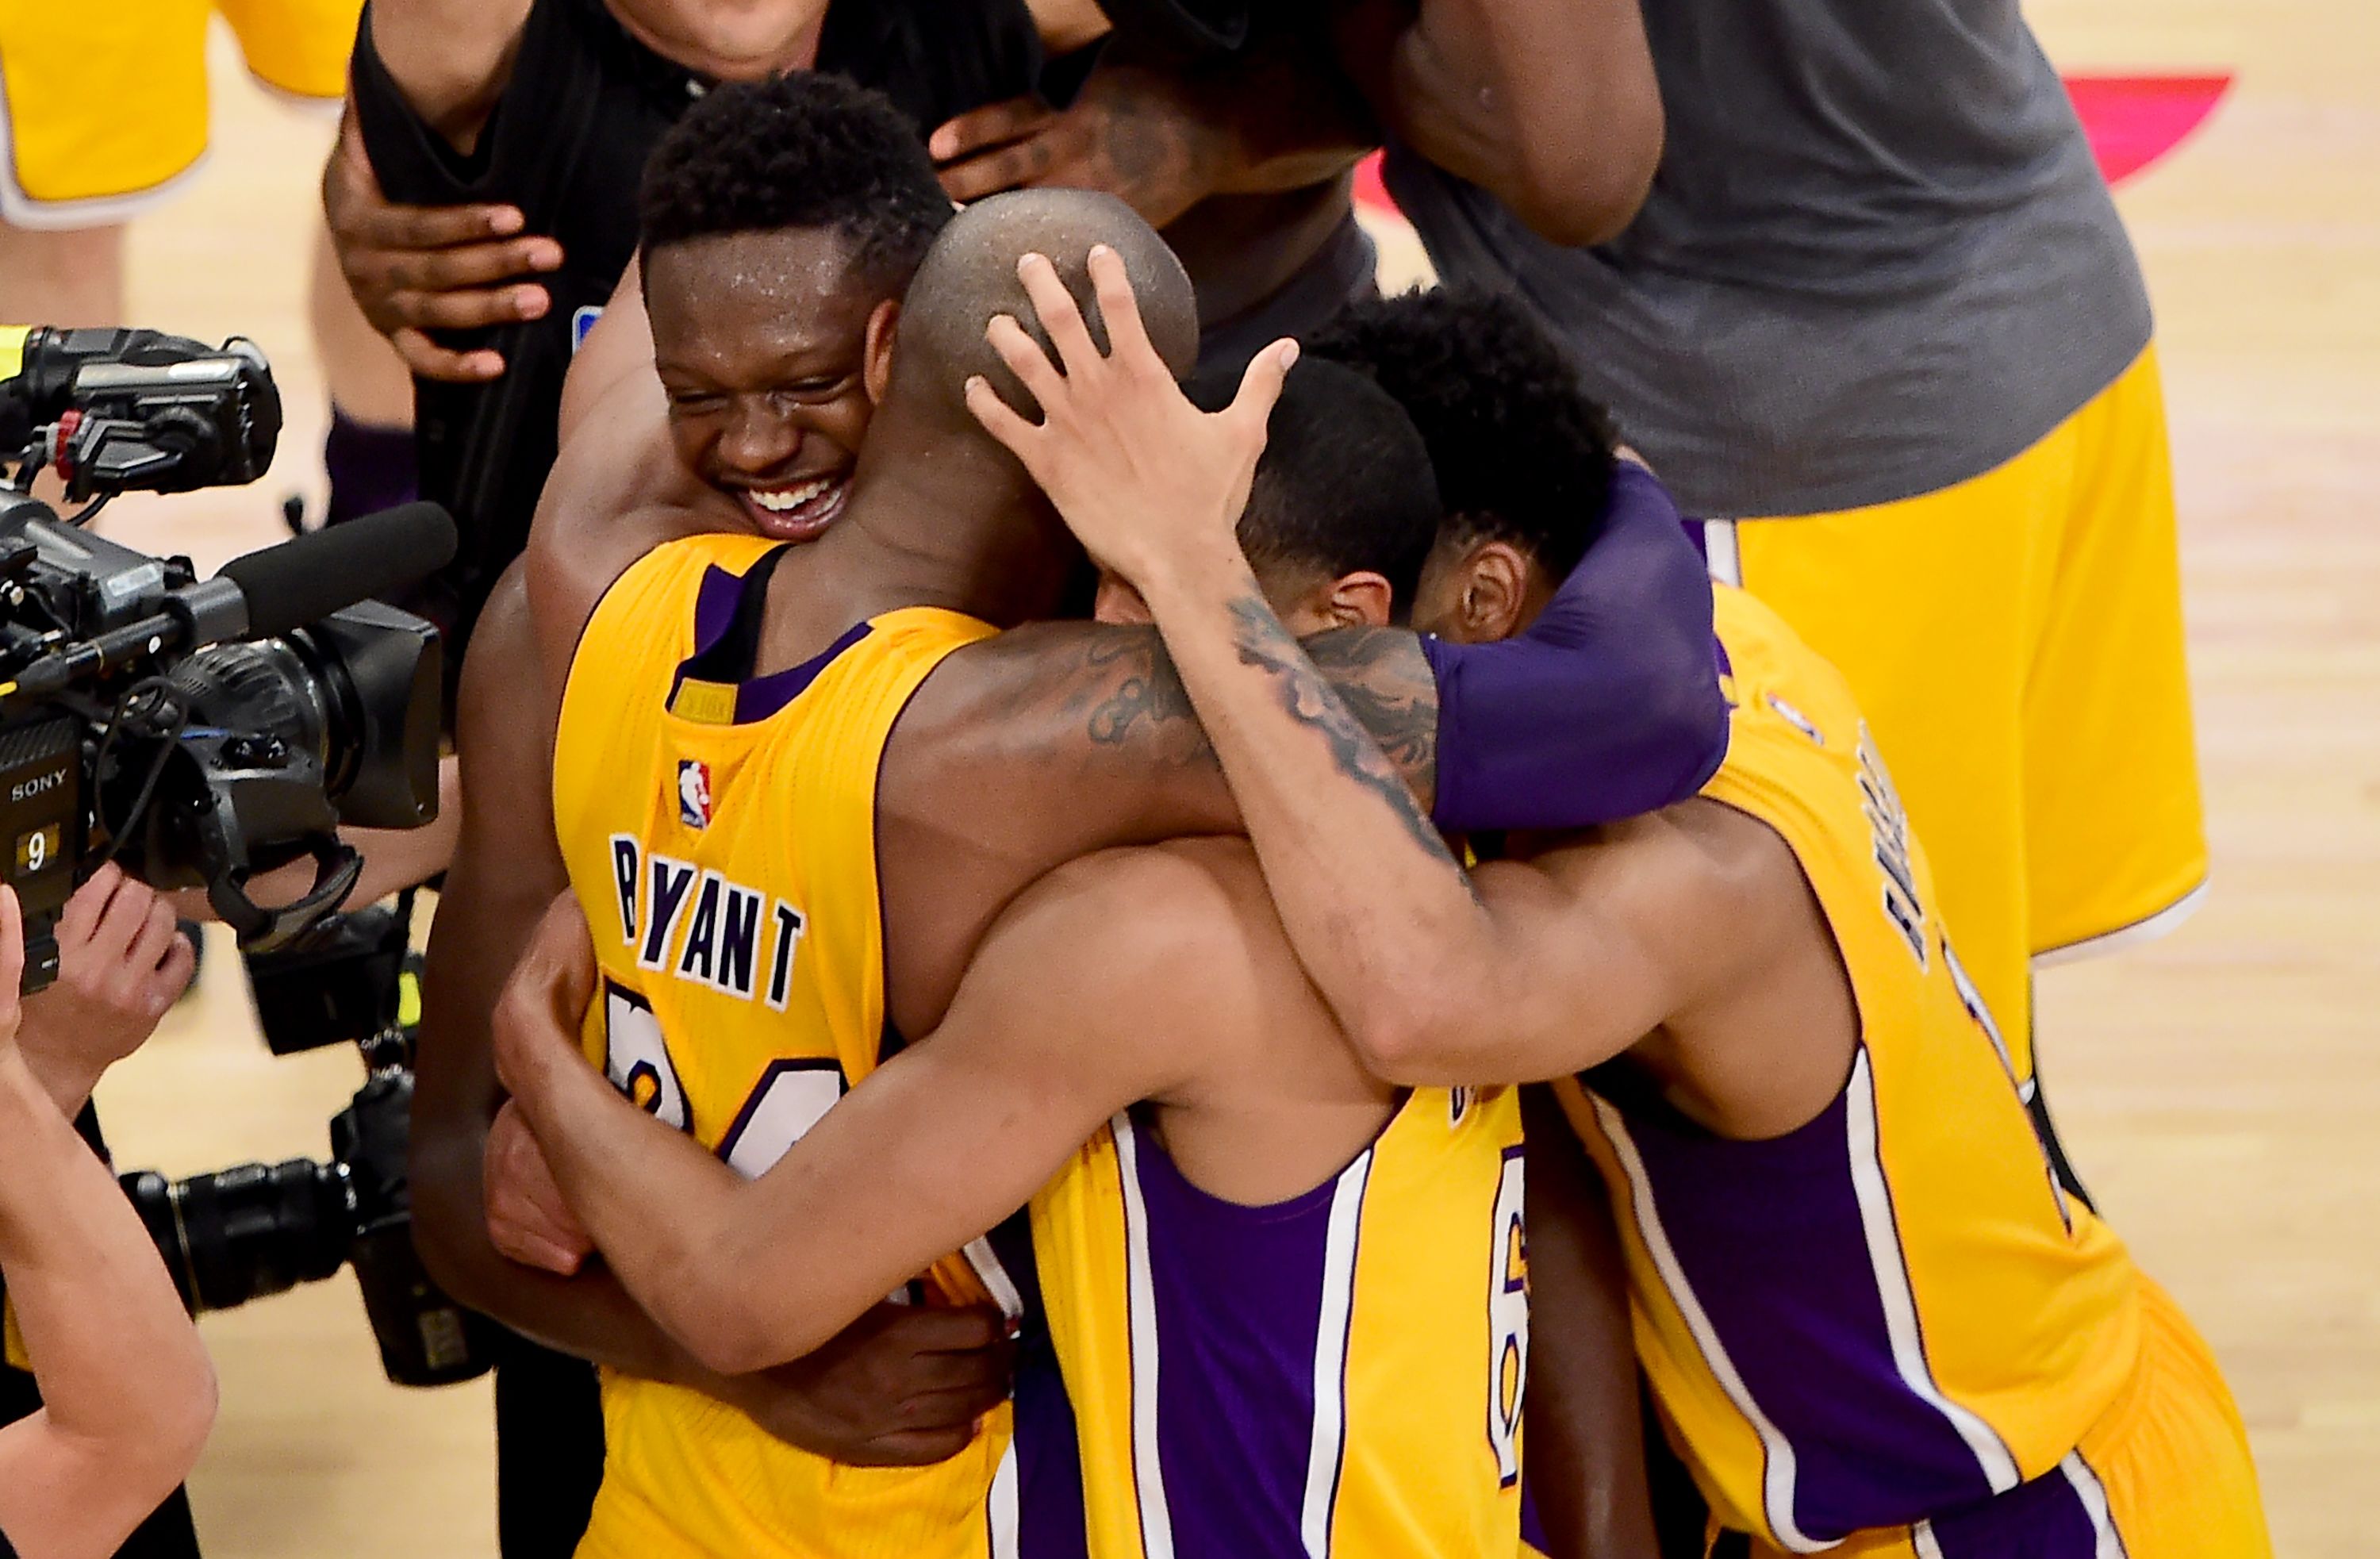 Kobe Bryant of the Los Angeles Lakers celebrates with teammates following his final game as a Laker